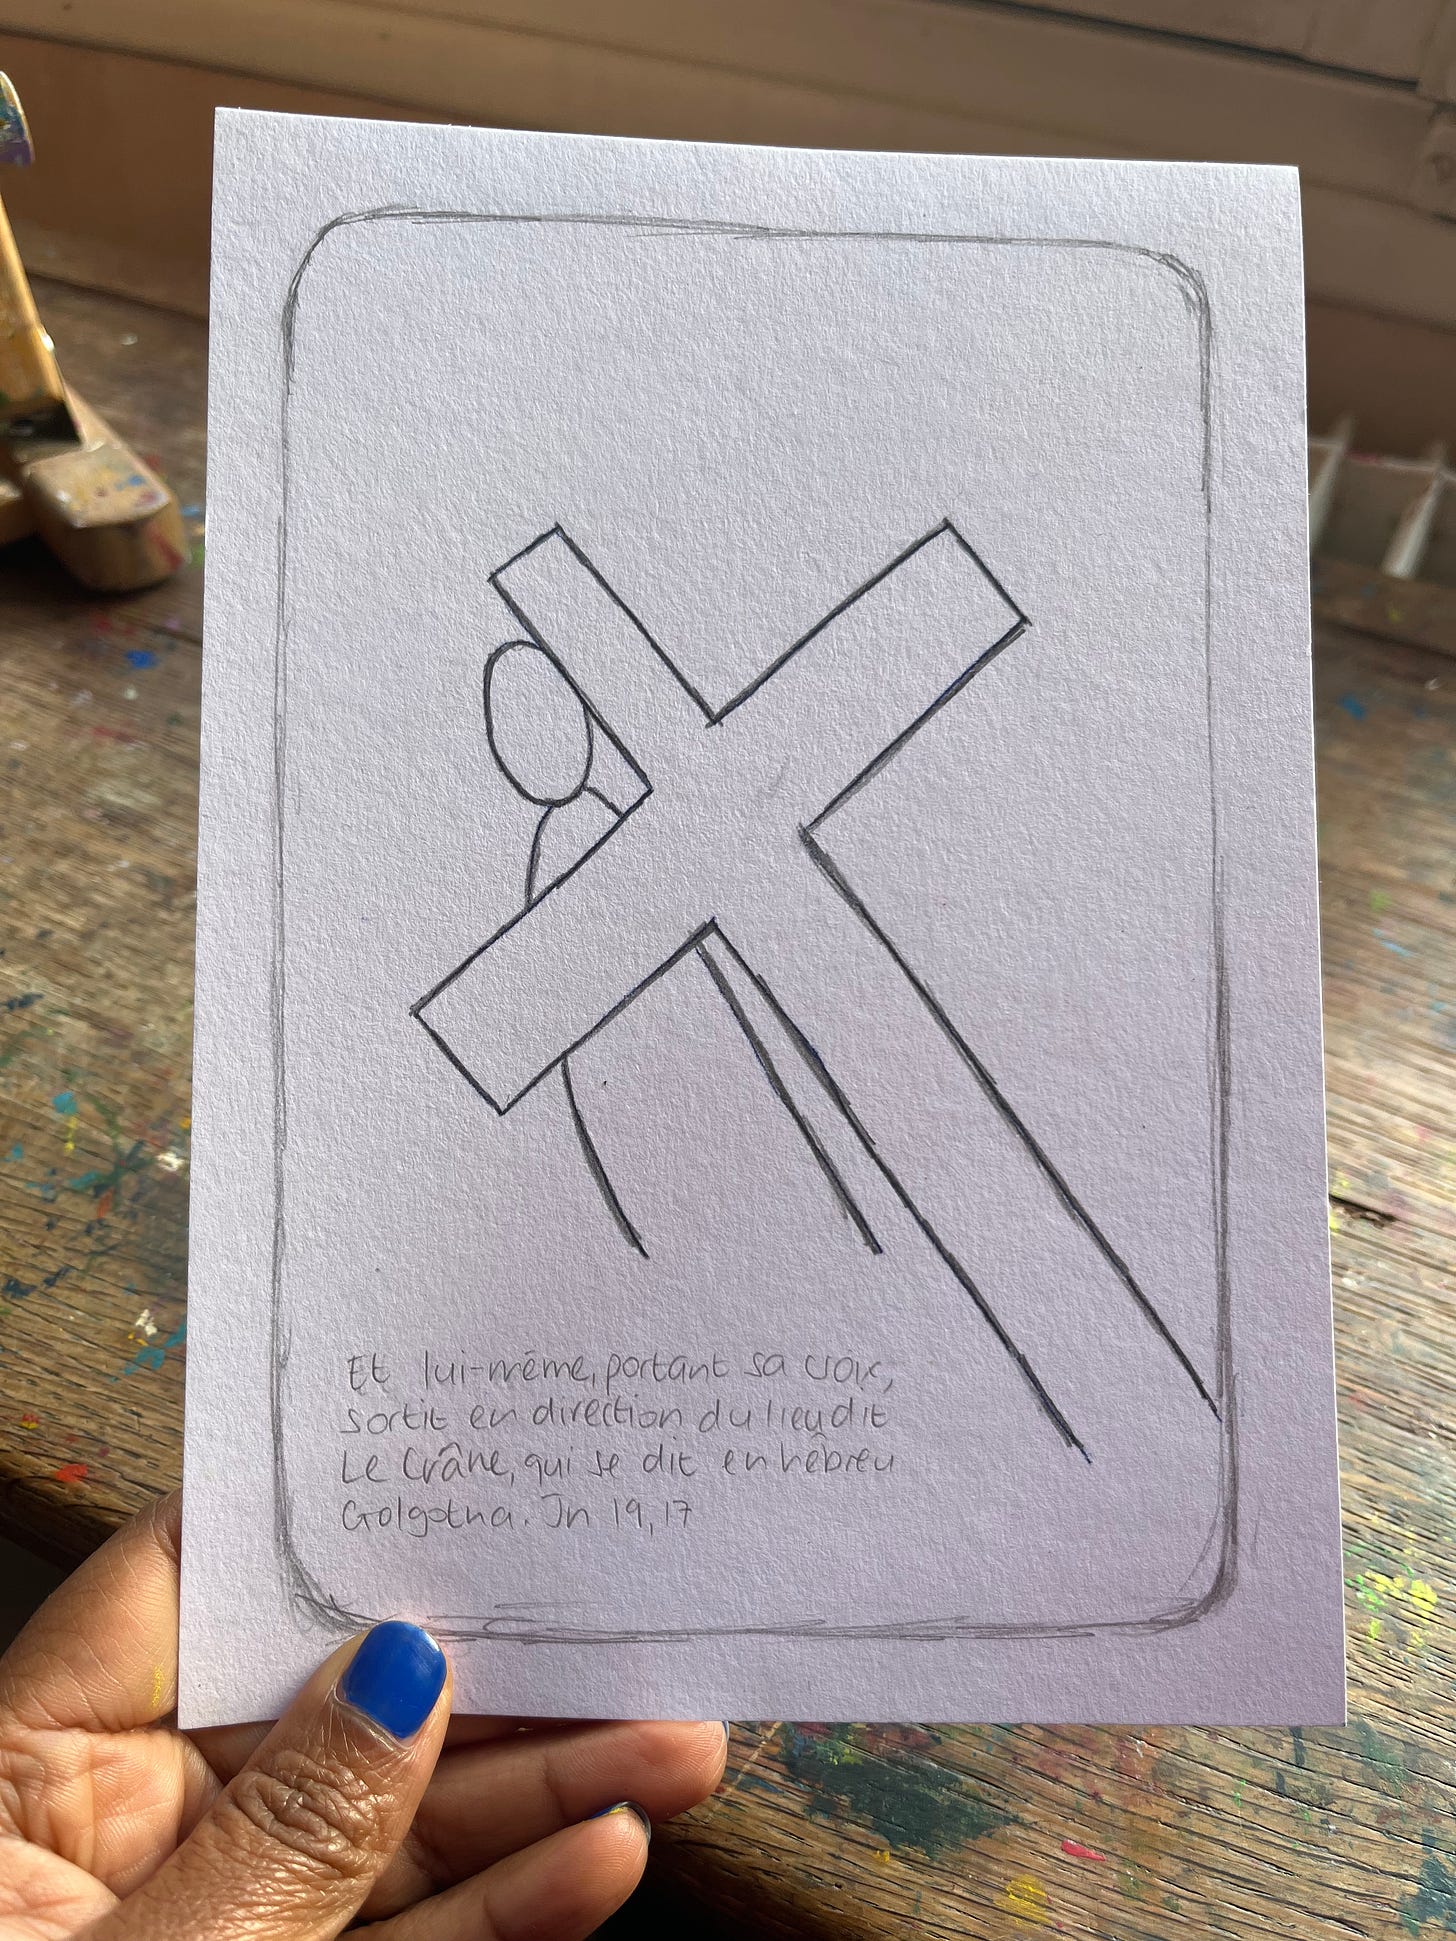 A black hand holding a drawing of a station of the cross